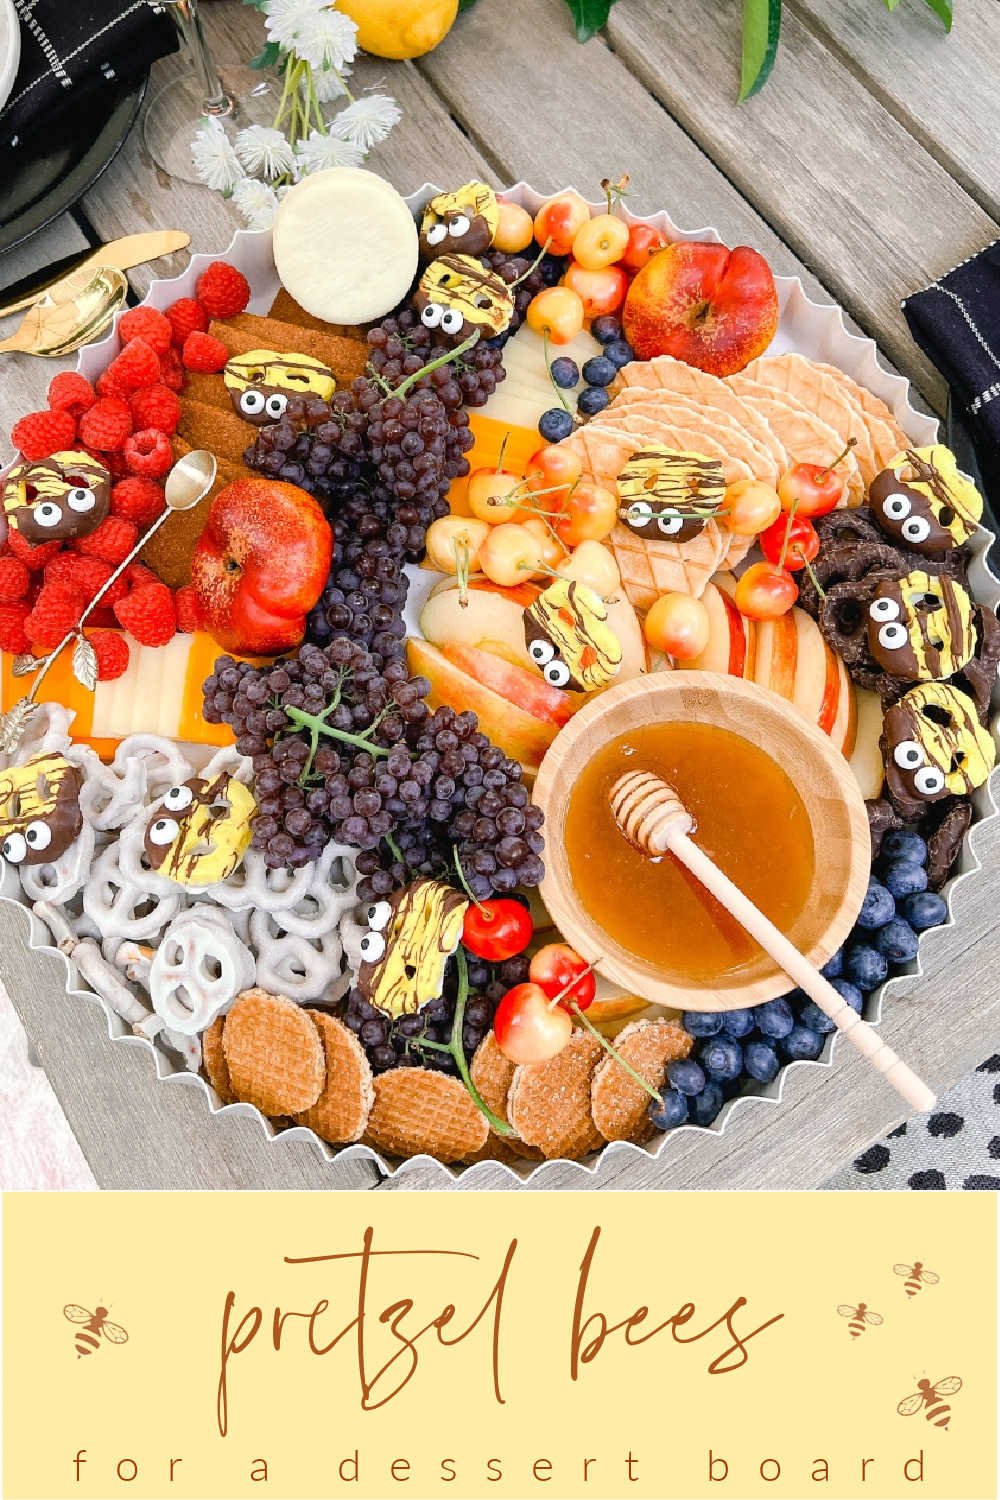 Honey-Themed Dessert Board with Pretzel Bees. Create a whimsical and delicious dessert board with sweet fruits, snacks and adorable pretzel bees.  